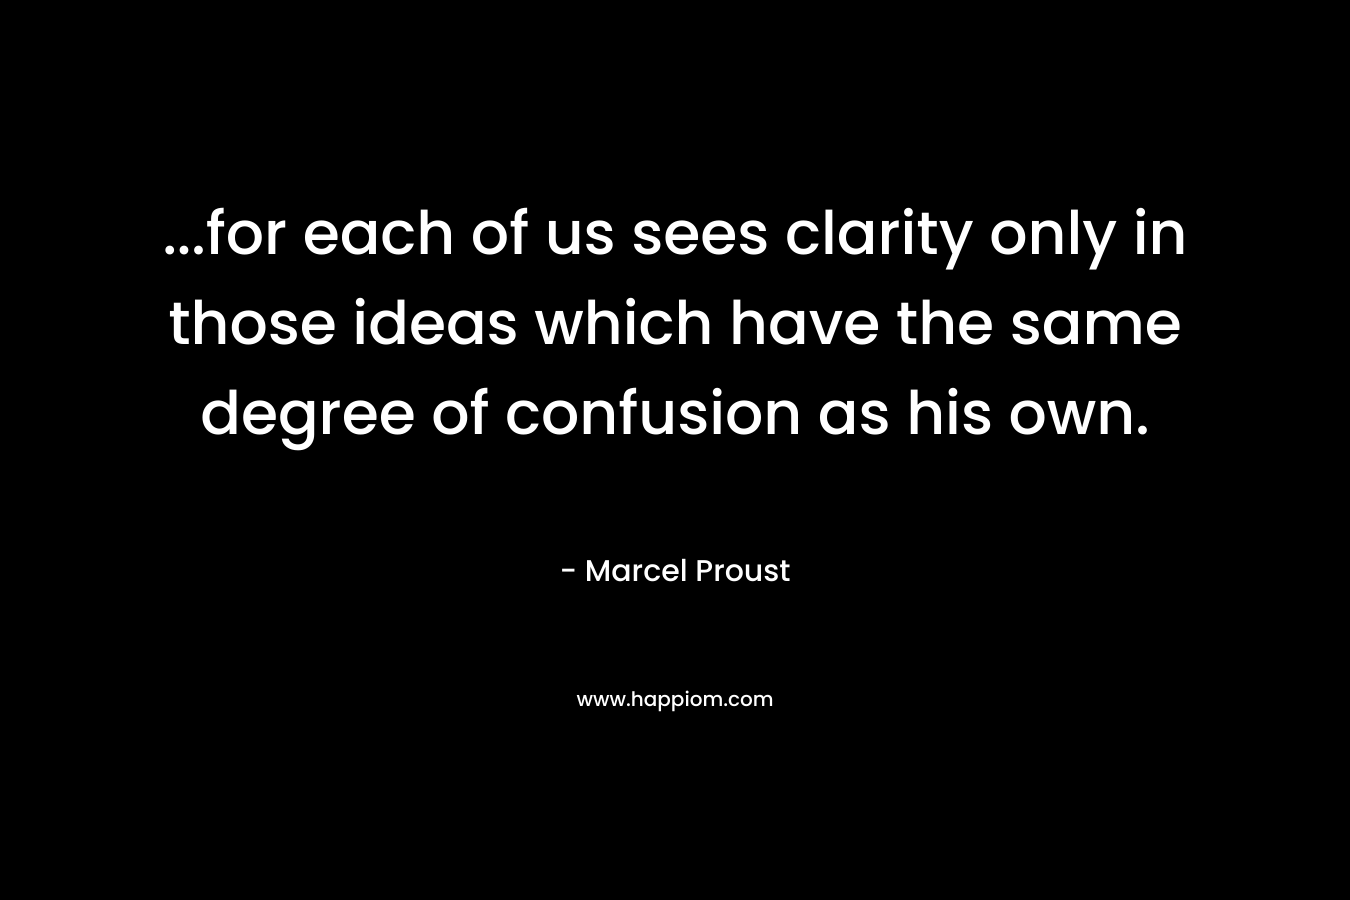 ...for each of us sees clarity only in those ideas which have the same degree of confusion as his own.